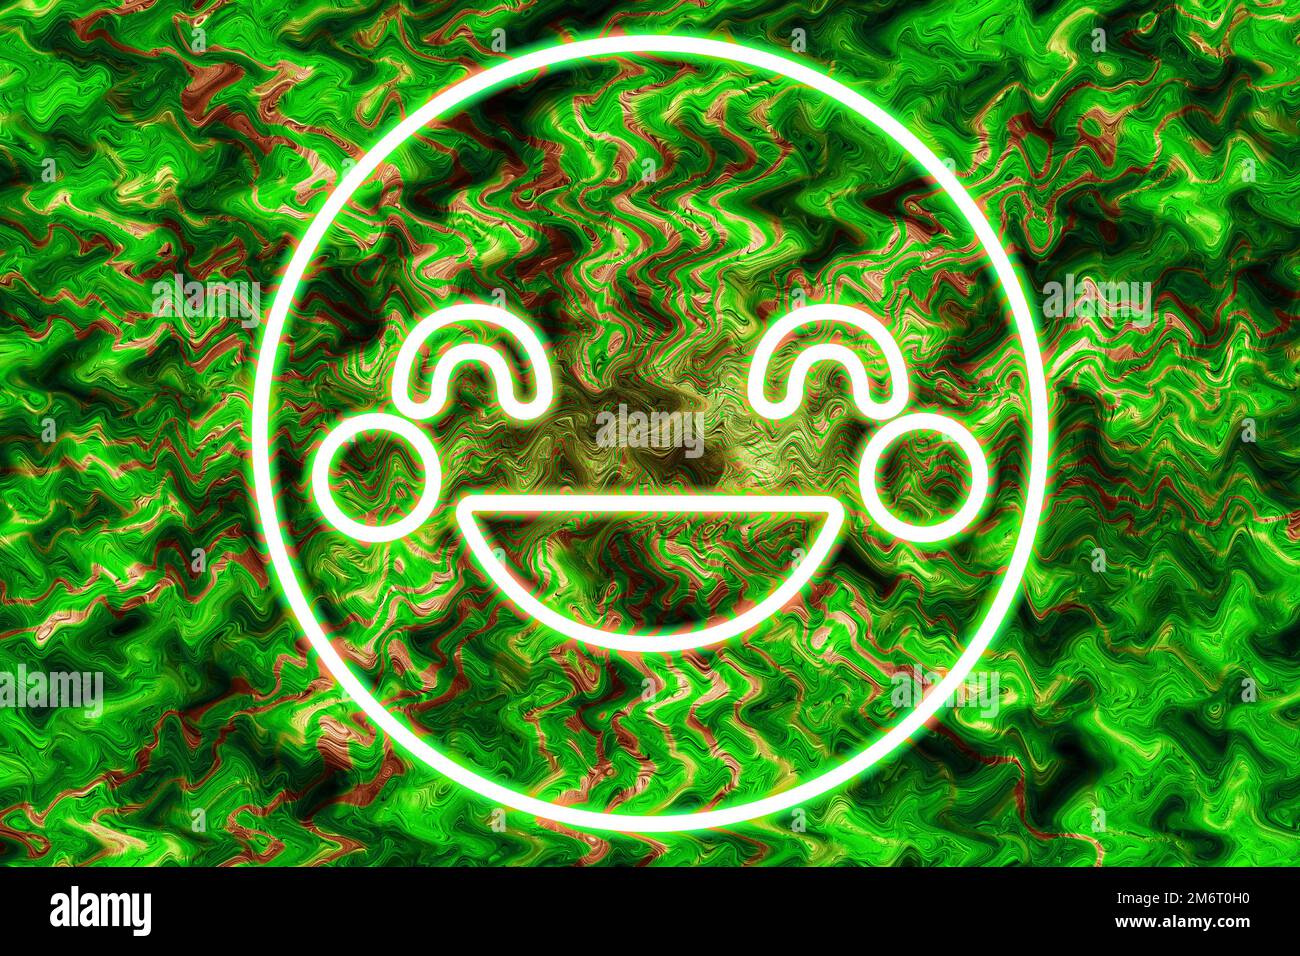 Modern creative abstract background with colored graphic emoticon. Digital texture with symbol emotion icon in modern style. Con Stock Photo